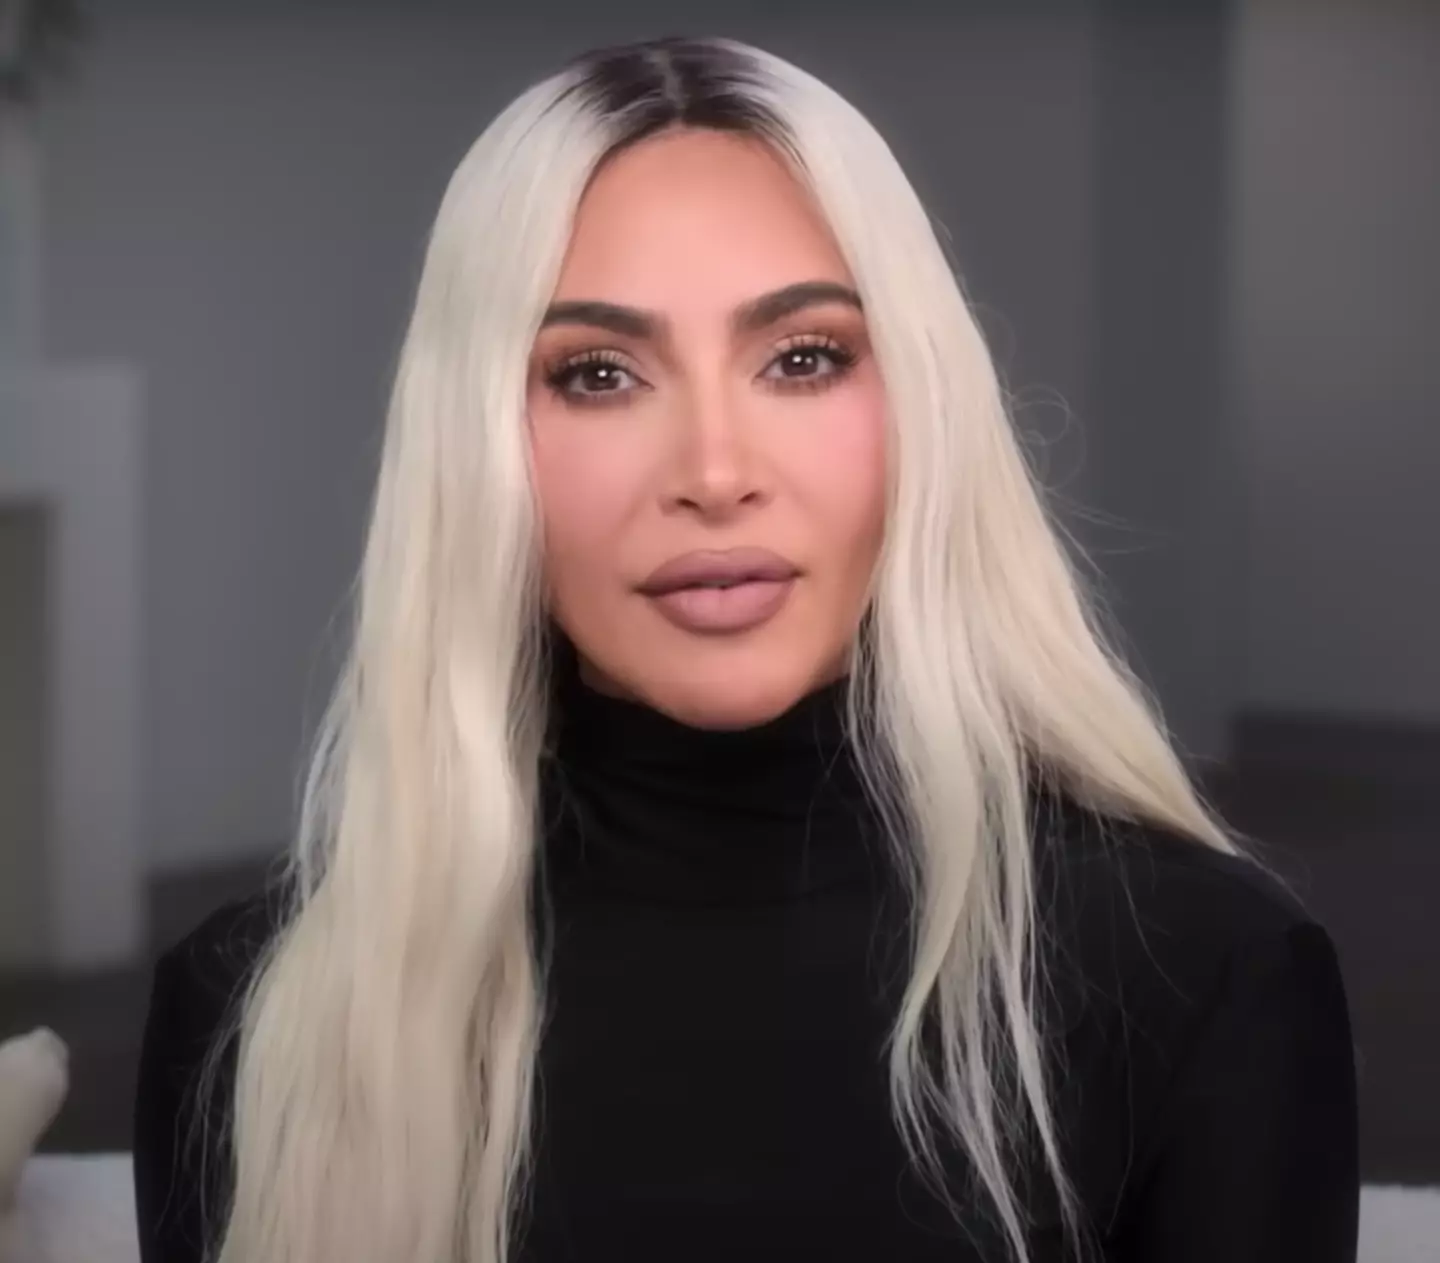 Kim Kardashian has opened up about her preferences in the bedroom.